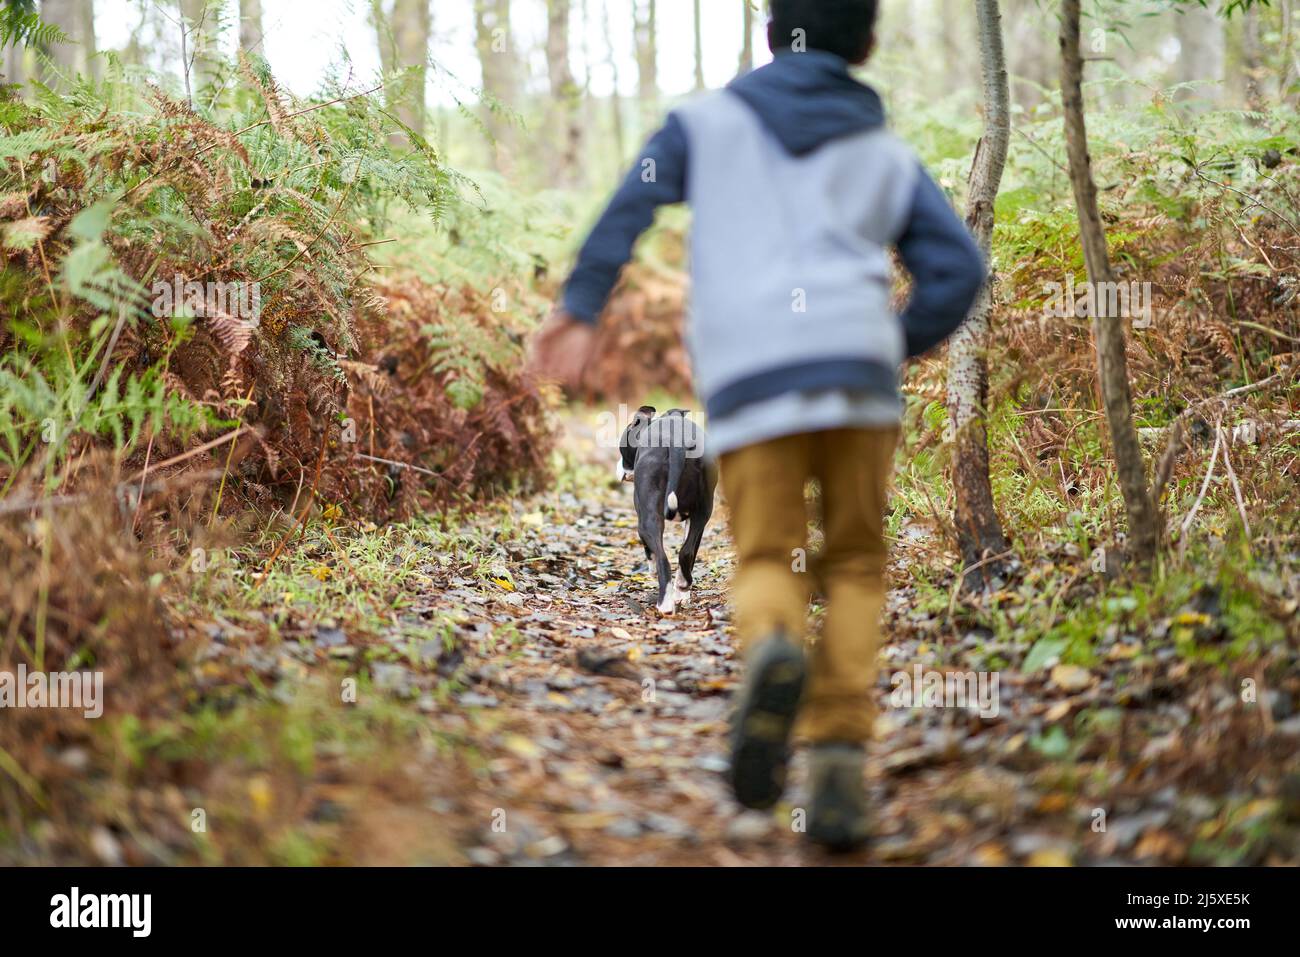 Boy chasing dog on trail in woods Stock Photo